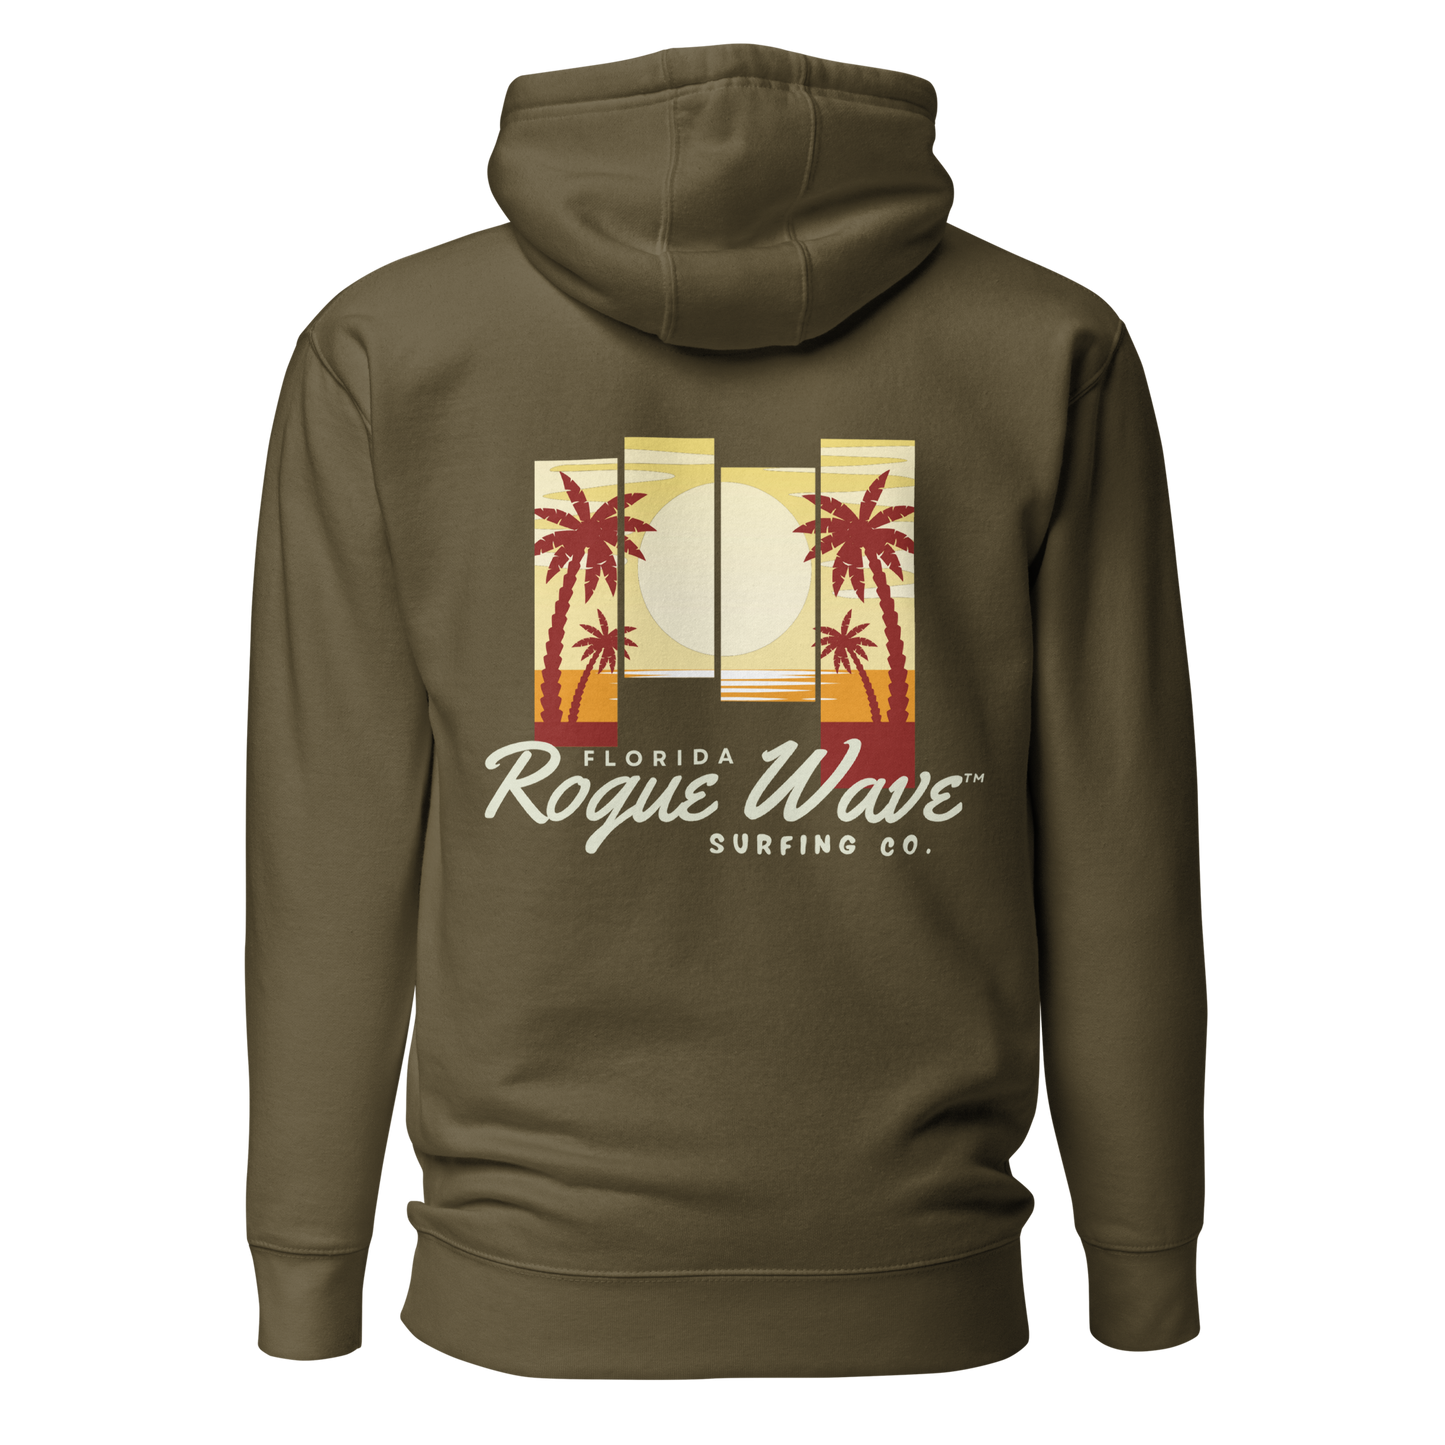 Rogue Wave Surfing Co™ Florida Hoodie